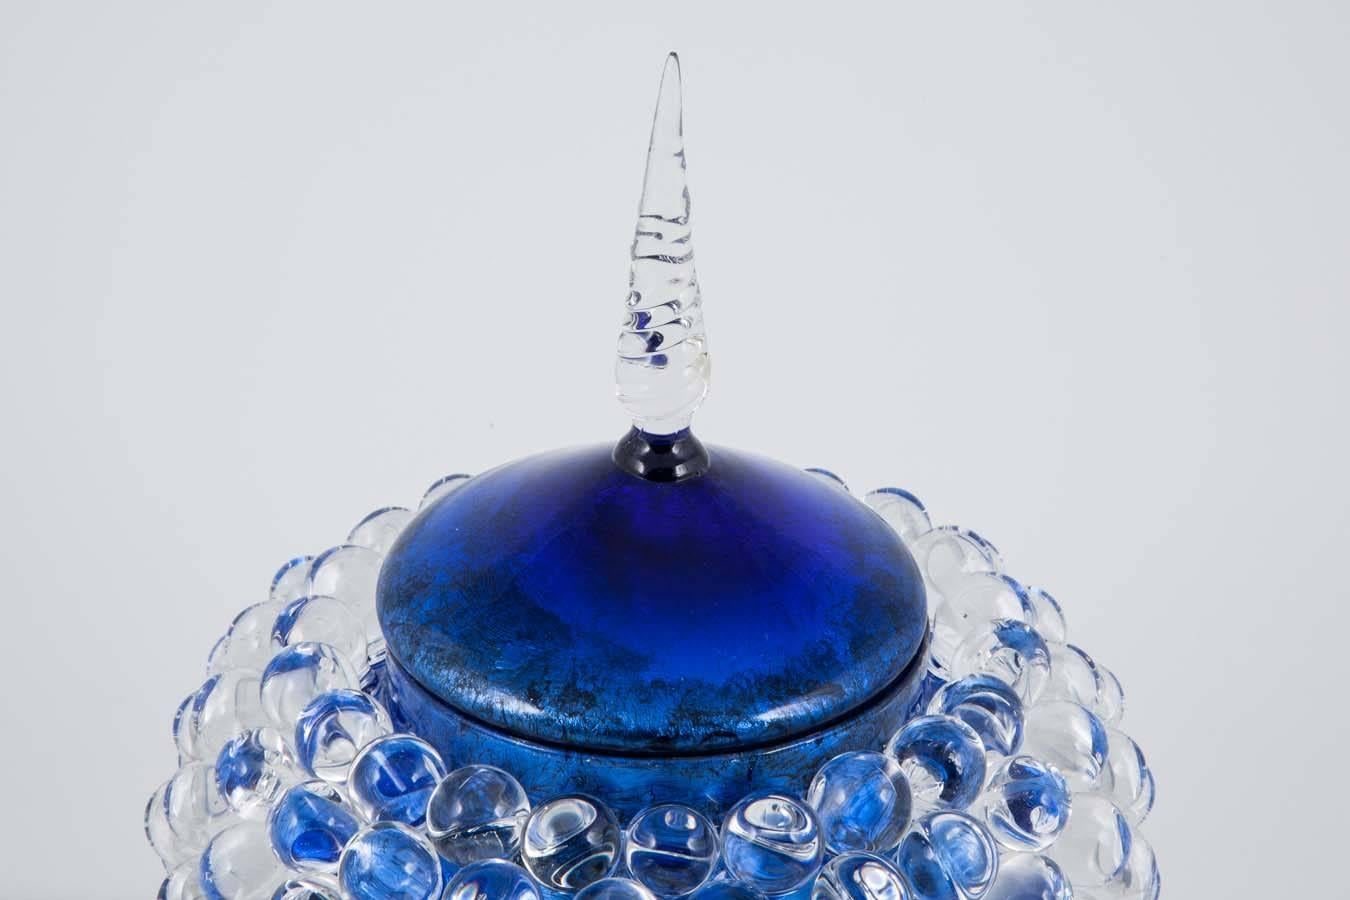 Empoli Jar with Spike, is a unique art glass jar by British glass artist James Lethbridge. Blown glass with gilding on the inside. The outer layer is covered in flameworked decoration and adornment. The piece has a removable top lid.

Initially